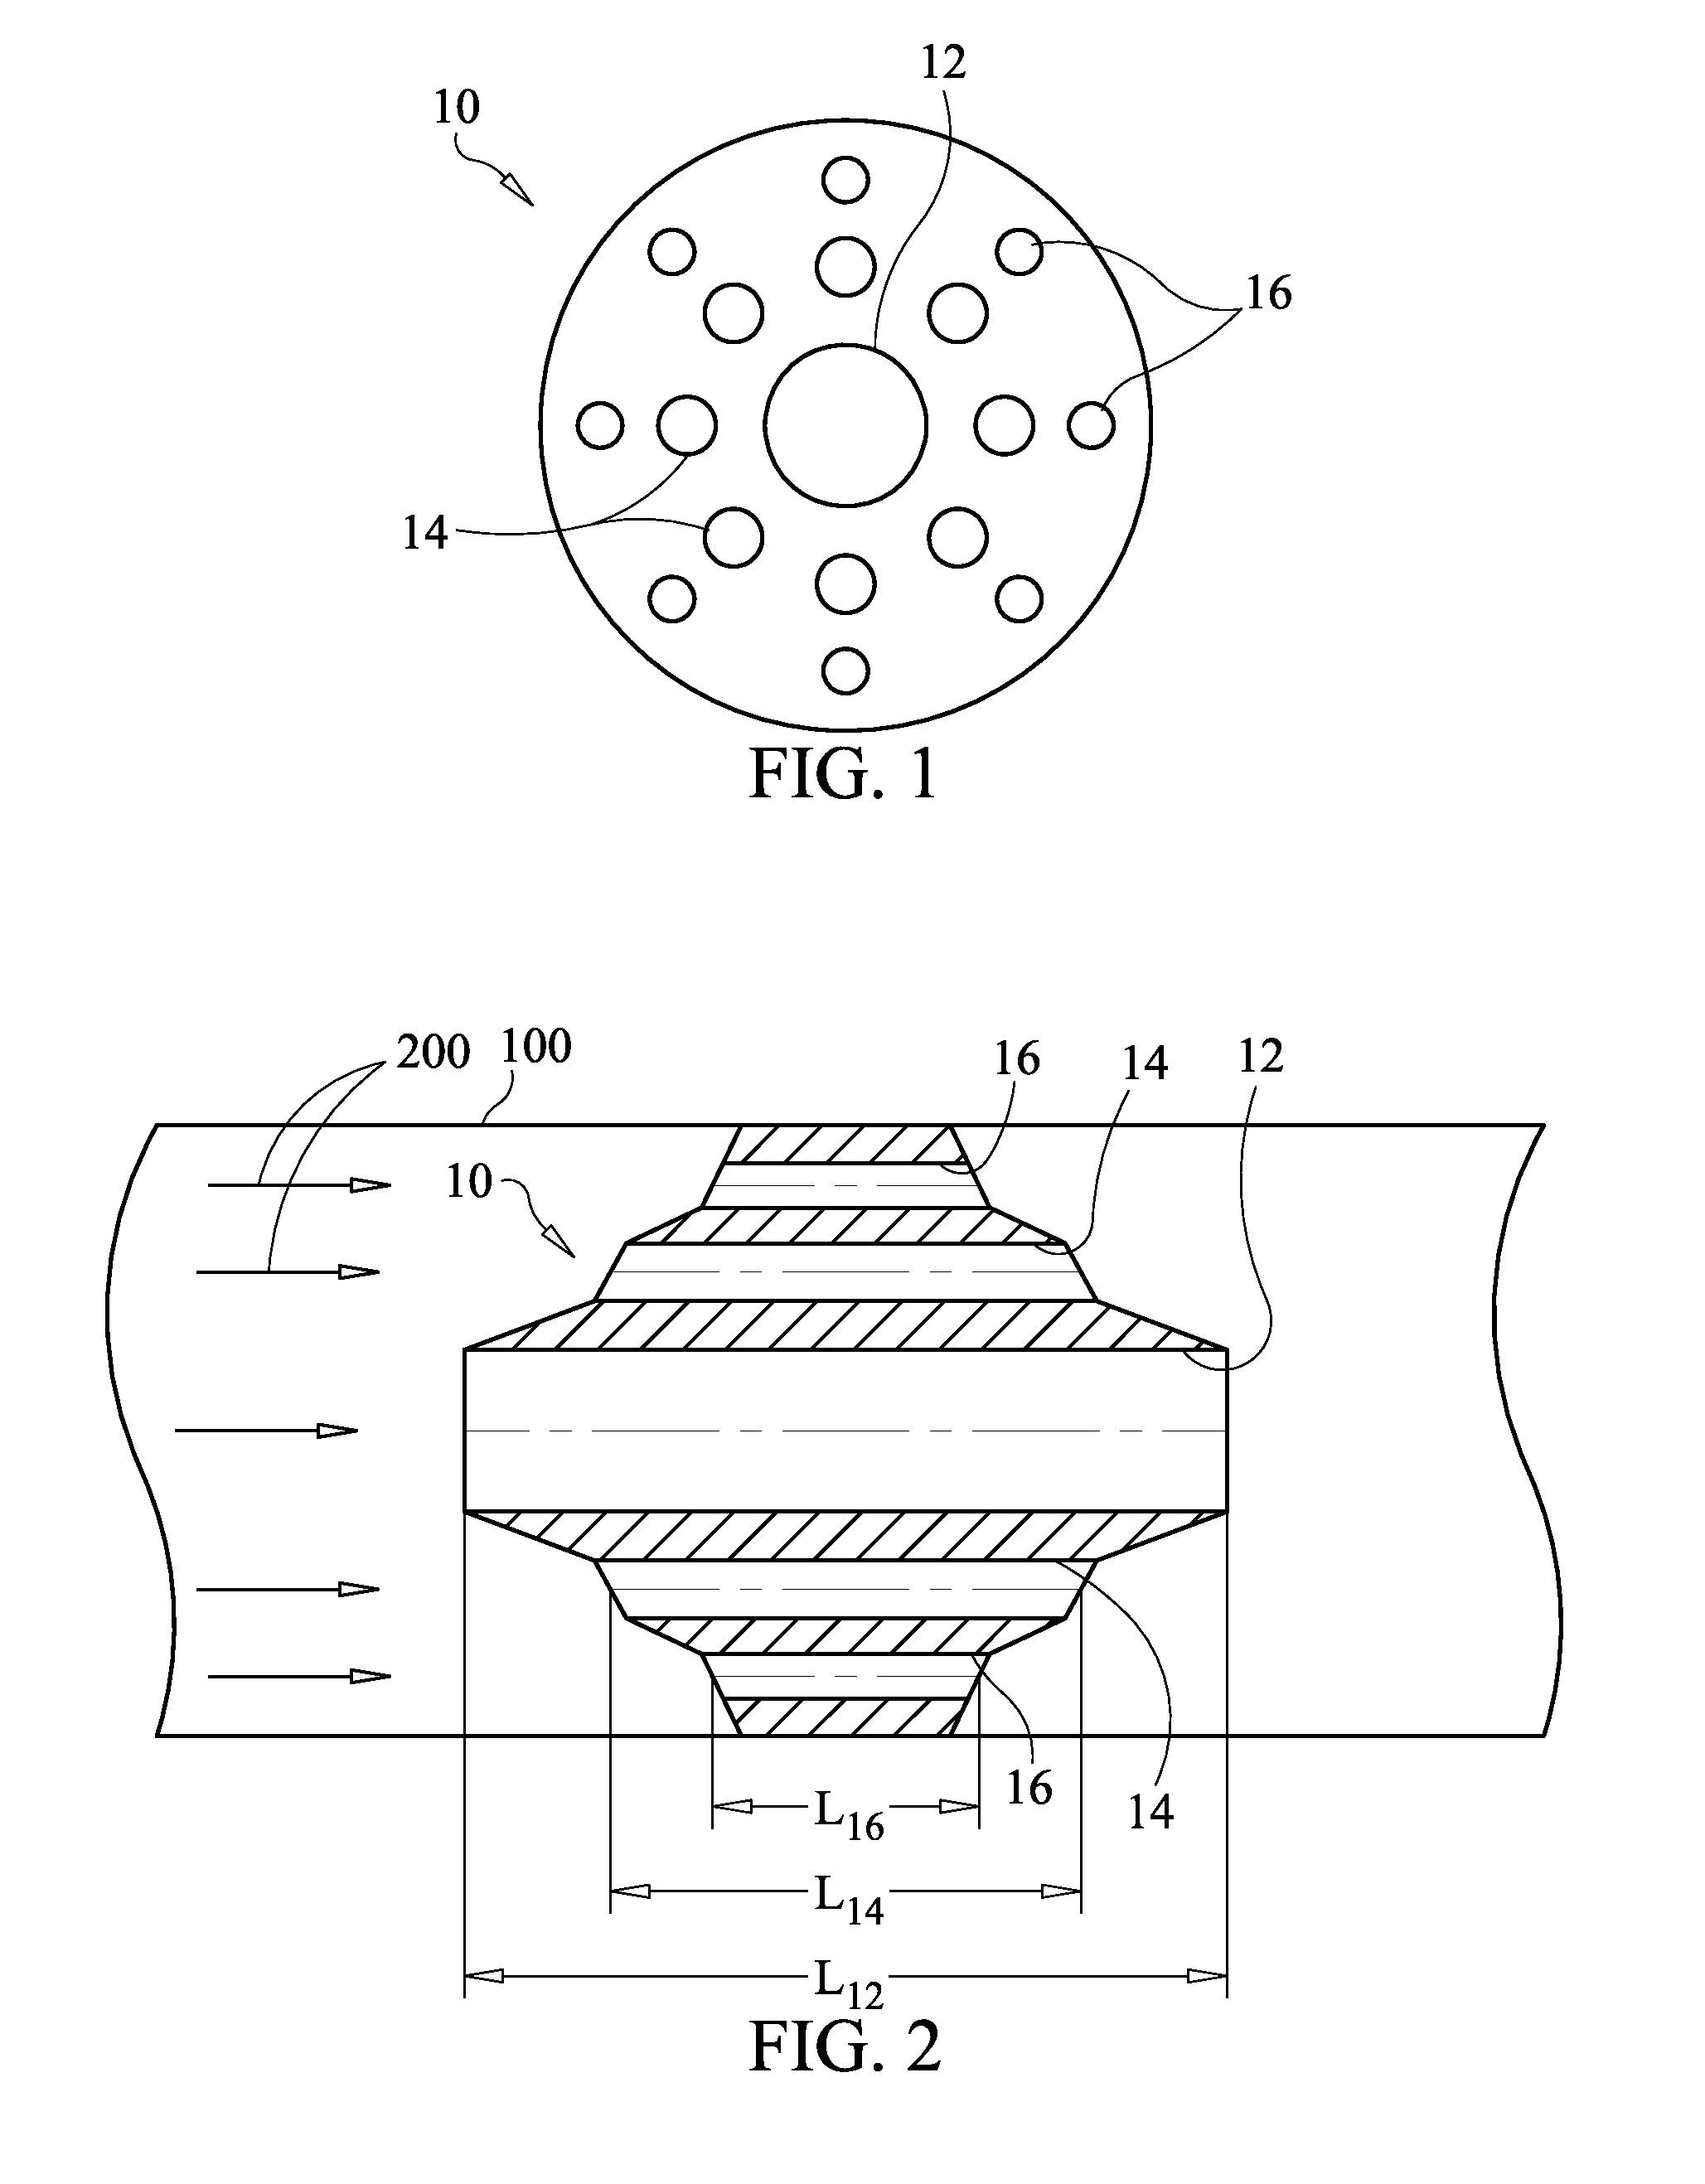 Flow plug with length-to-hole size uniformity for use in flow conditioning and flow metering